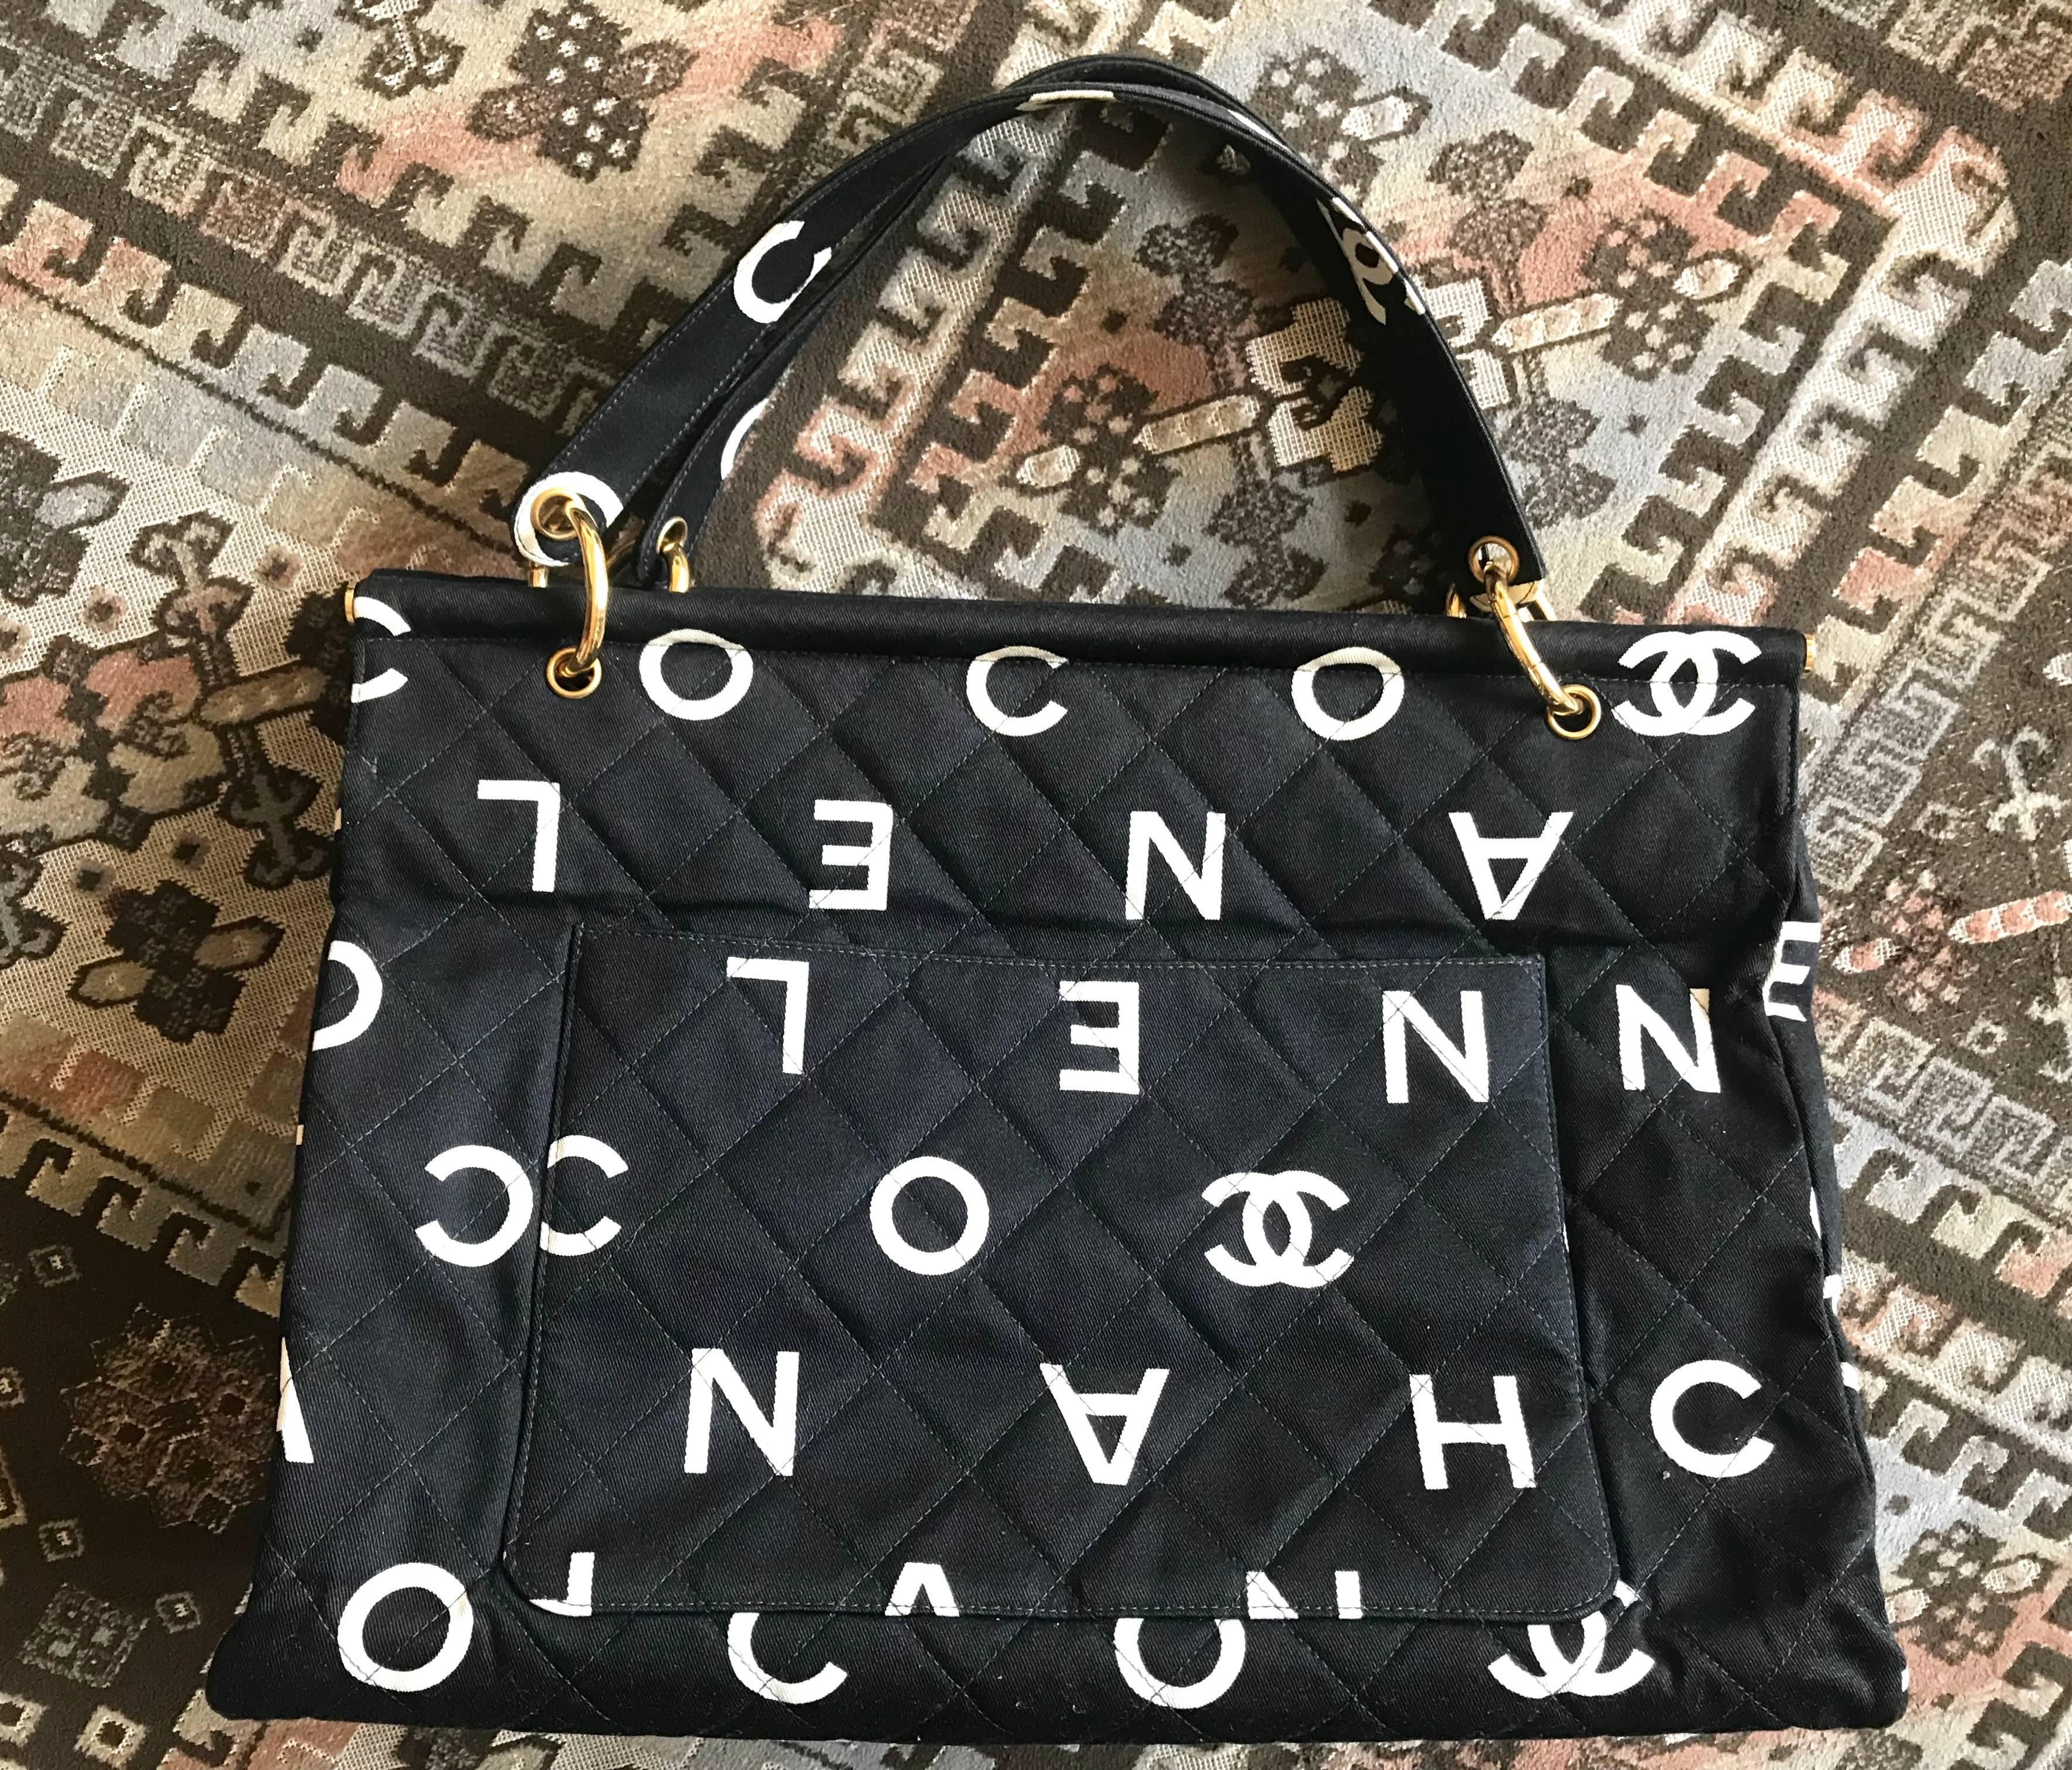 1990s. Vintage CHANEL black fabric canvas large tote bag with white Chanel CC logo print all over. Must have daily use vintage Chanel purse.

Introducing one of the most chic and mod CHANEL purses back in the 90's!
Black canvas with white logo and